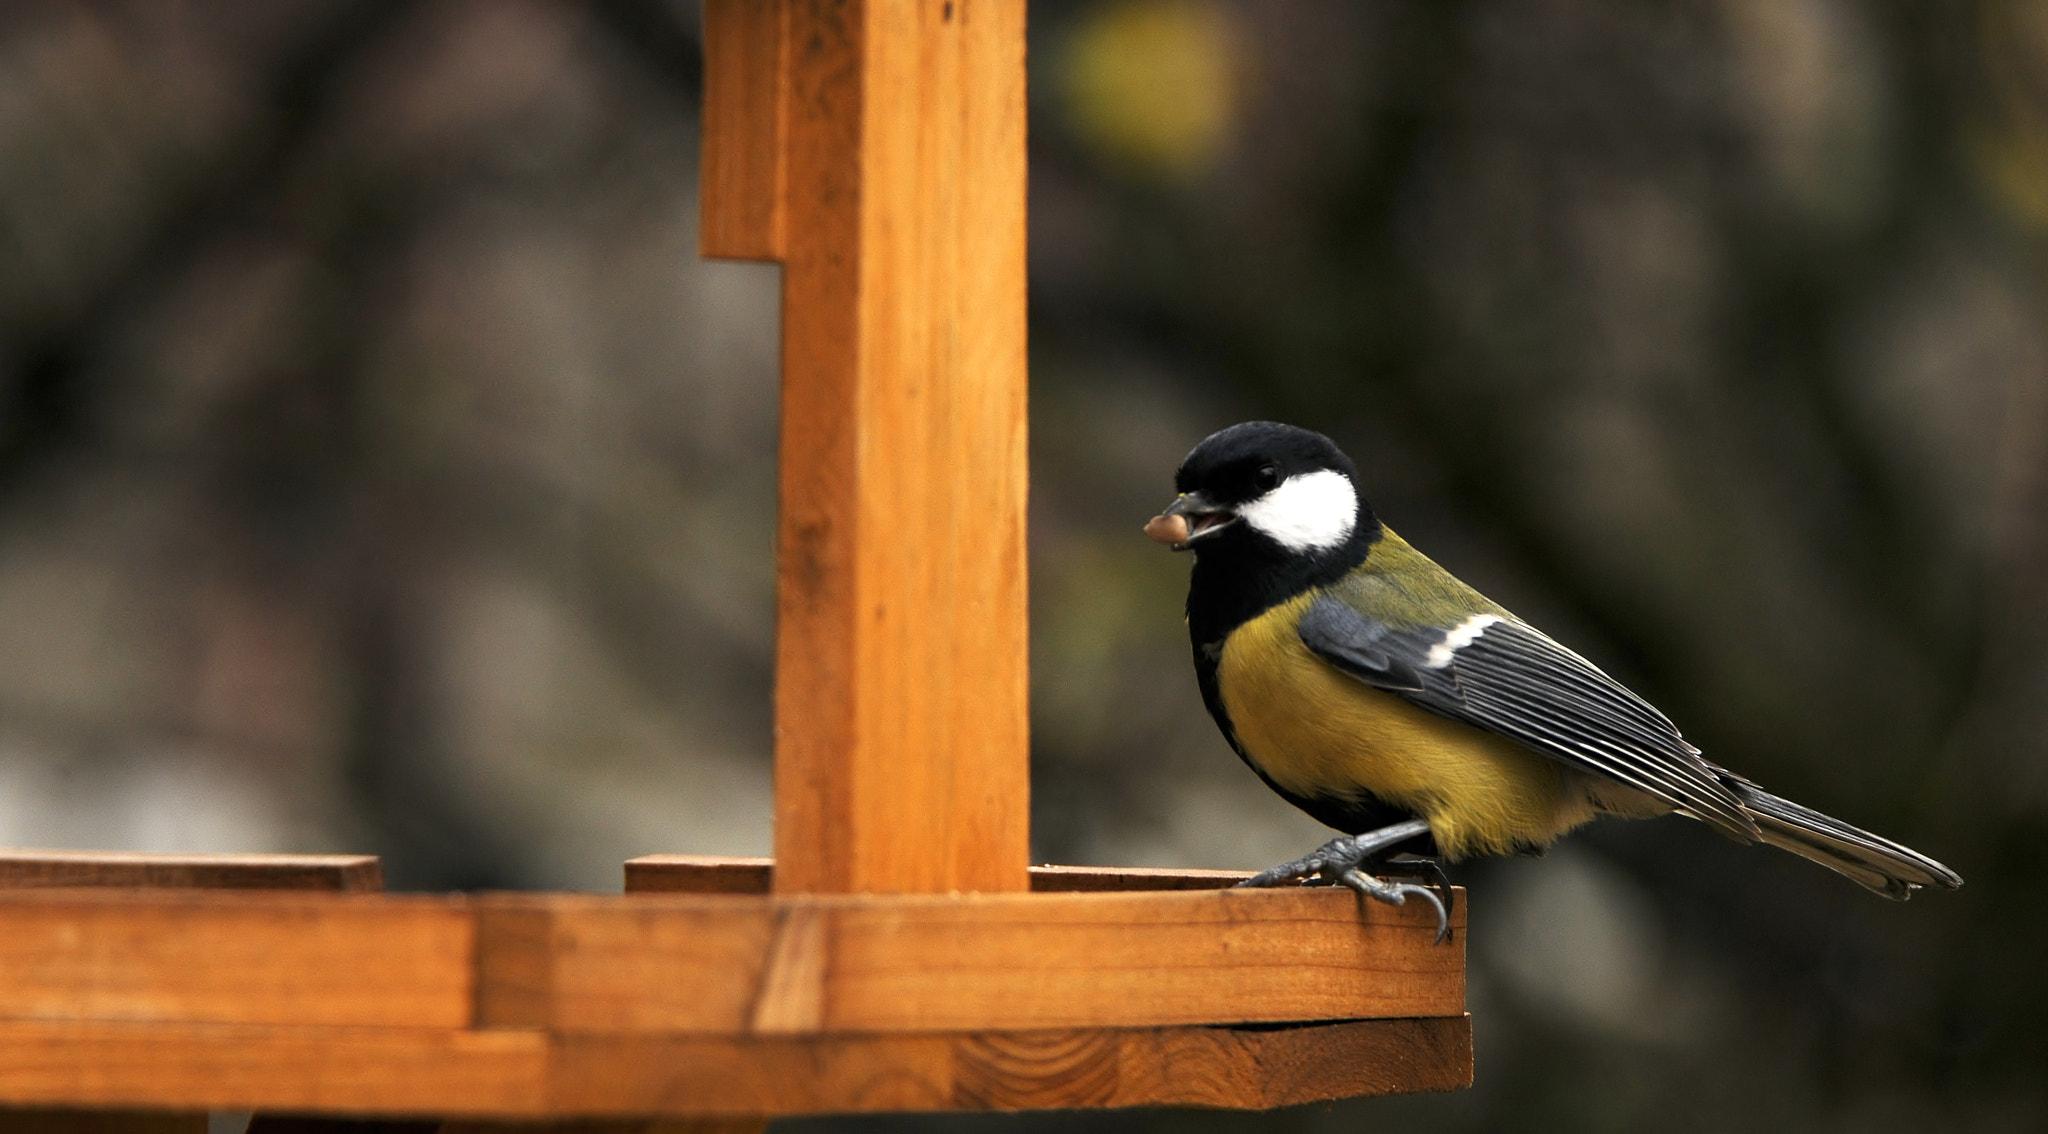 Nikon D300 sample photo. Cloudy day at the feeder photography